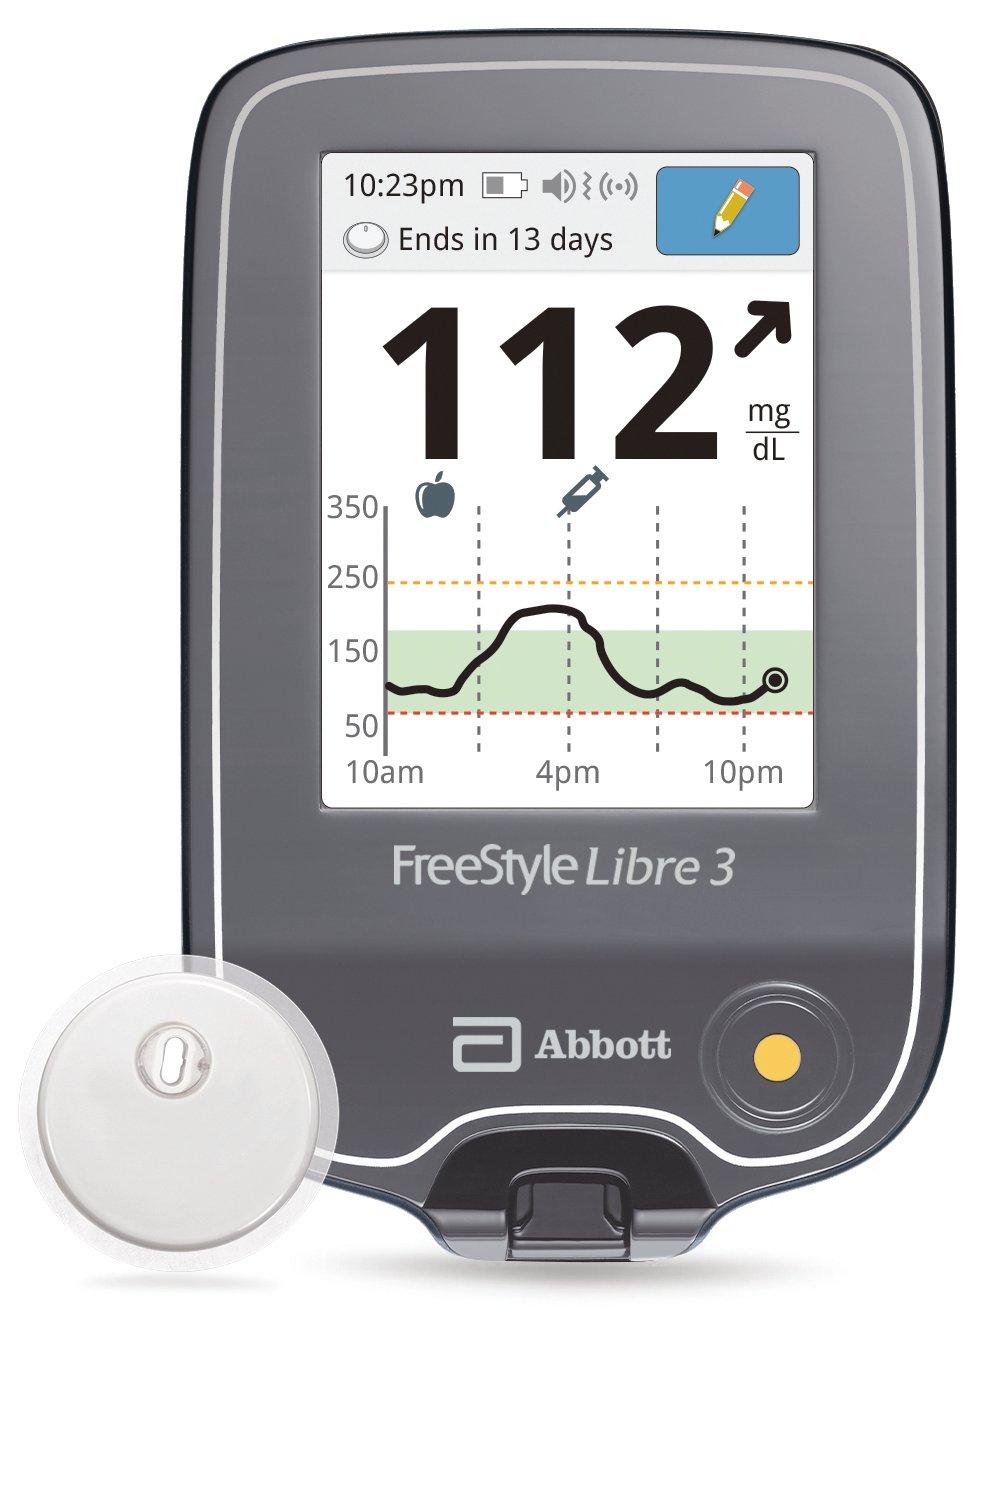 fda-clears-reader-for-abbott-s-freestyle-libre-3-system-endocrine-news